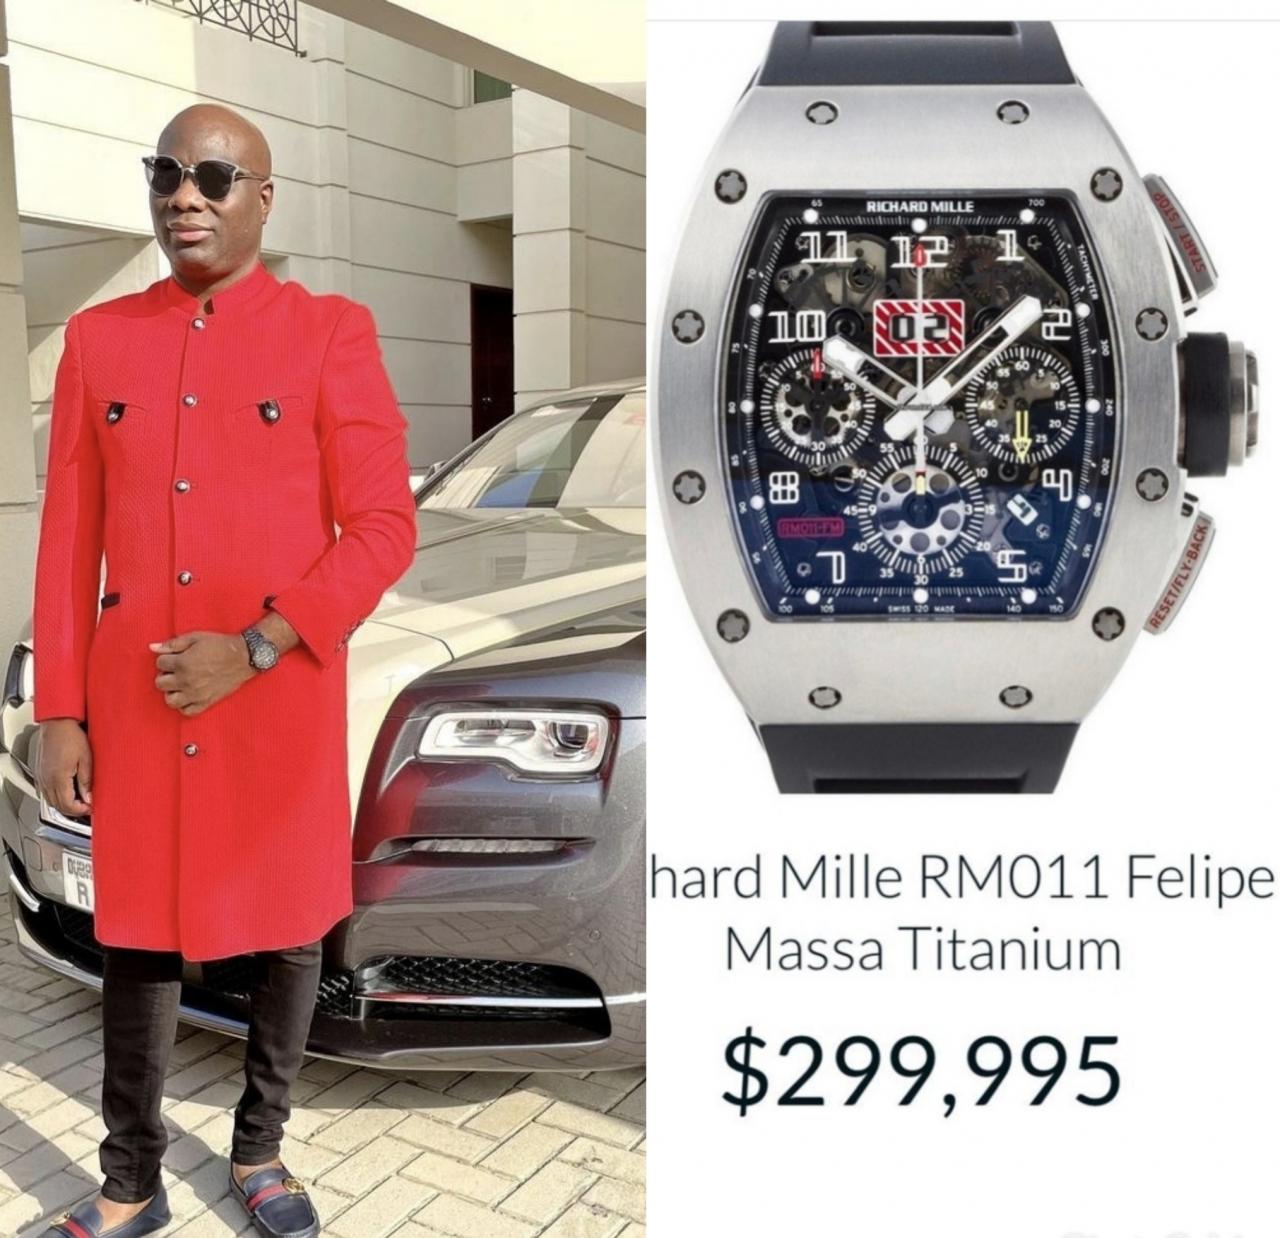 Mompha shares excitement as his Richard Mille watch increases in value